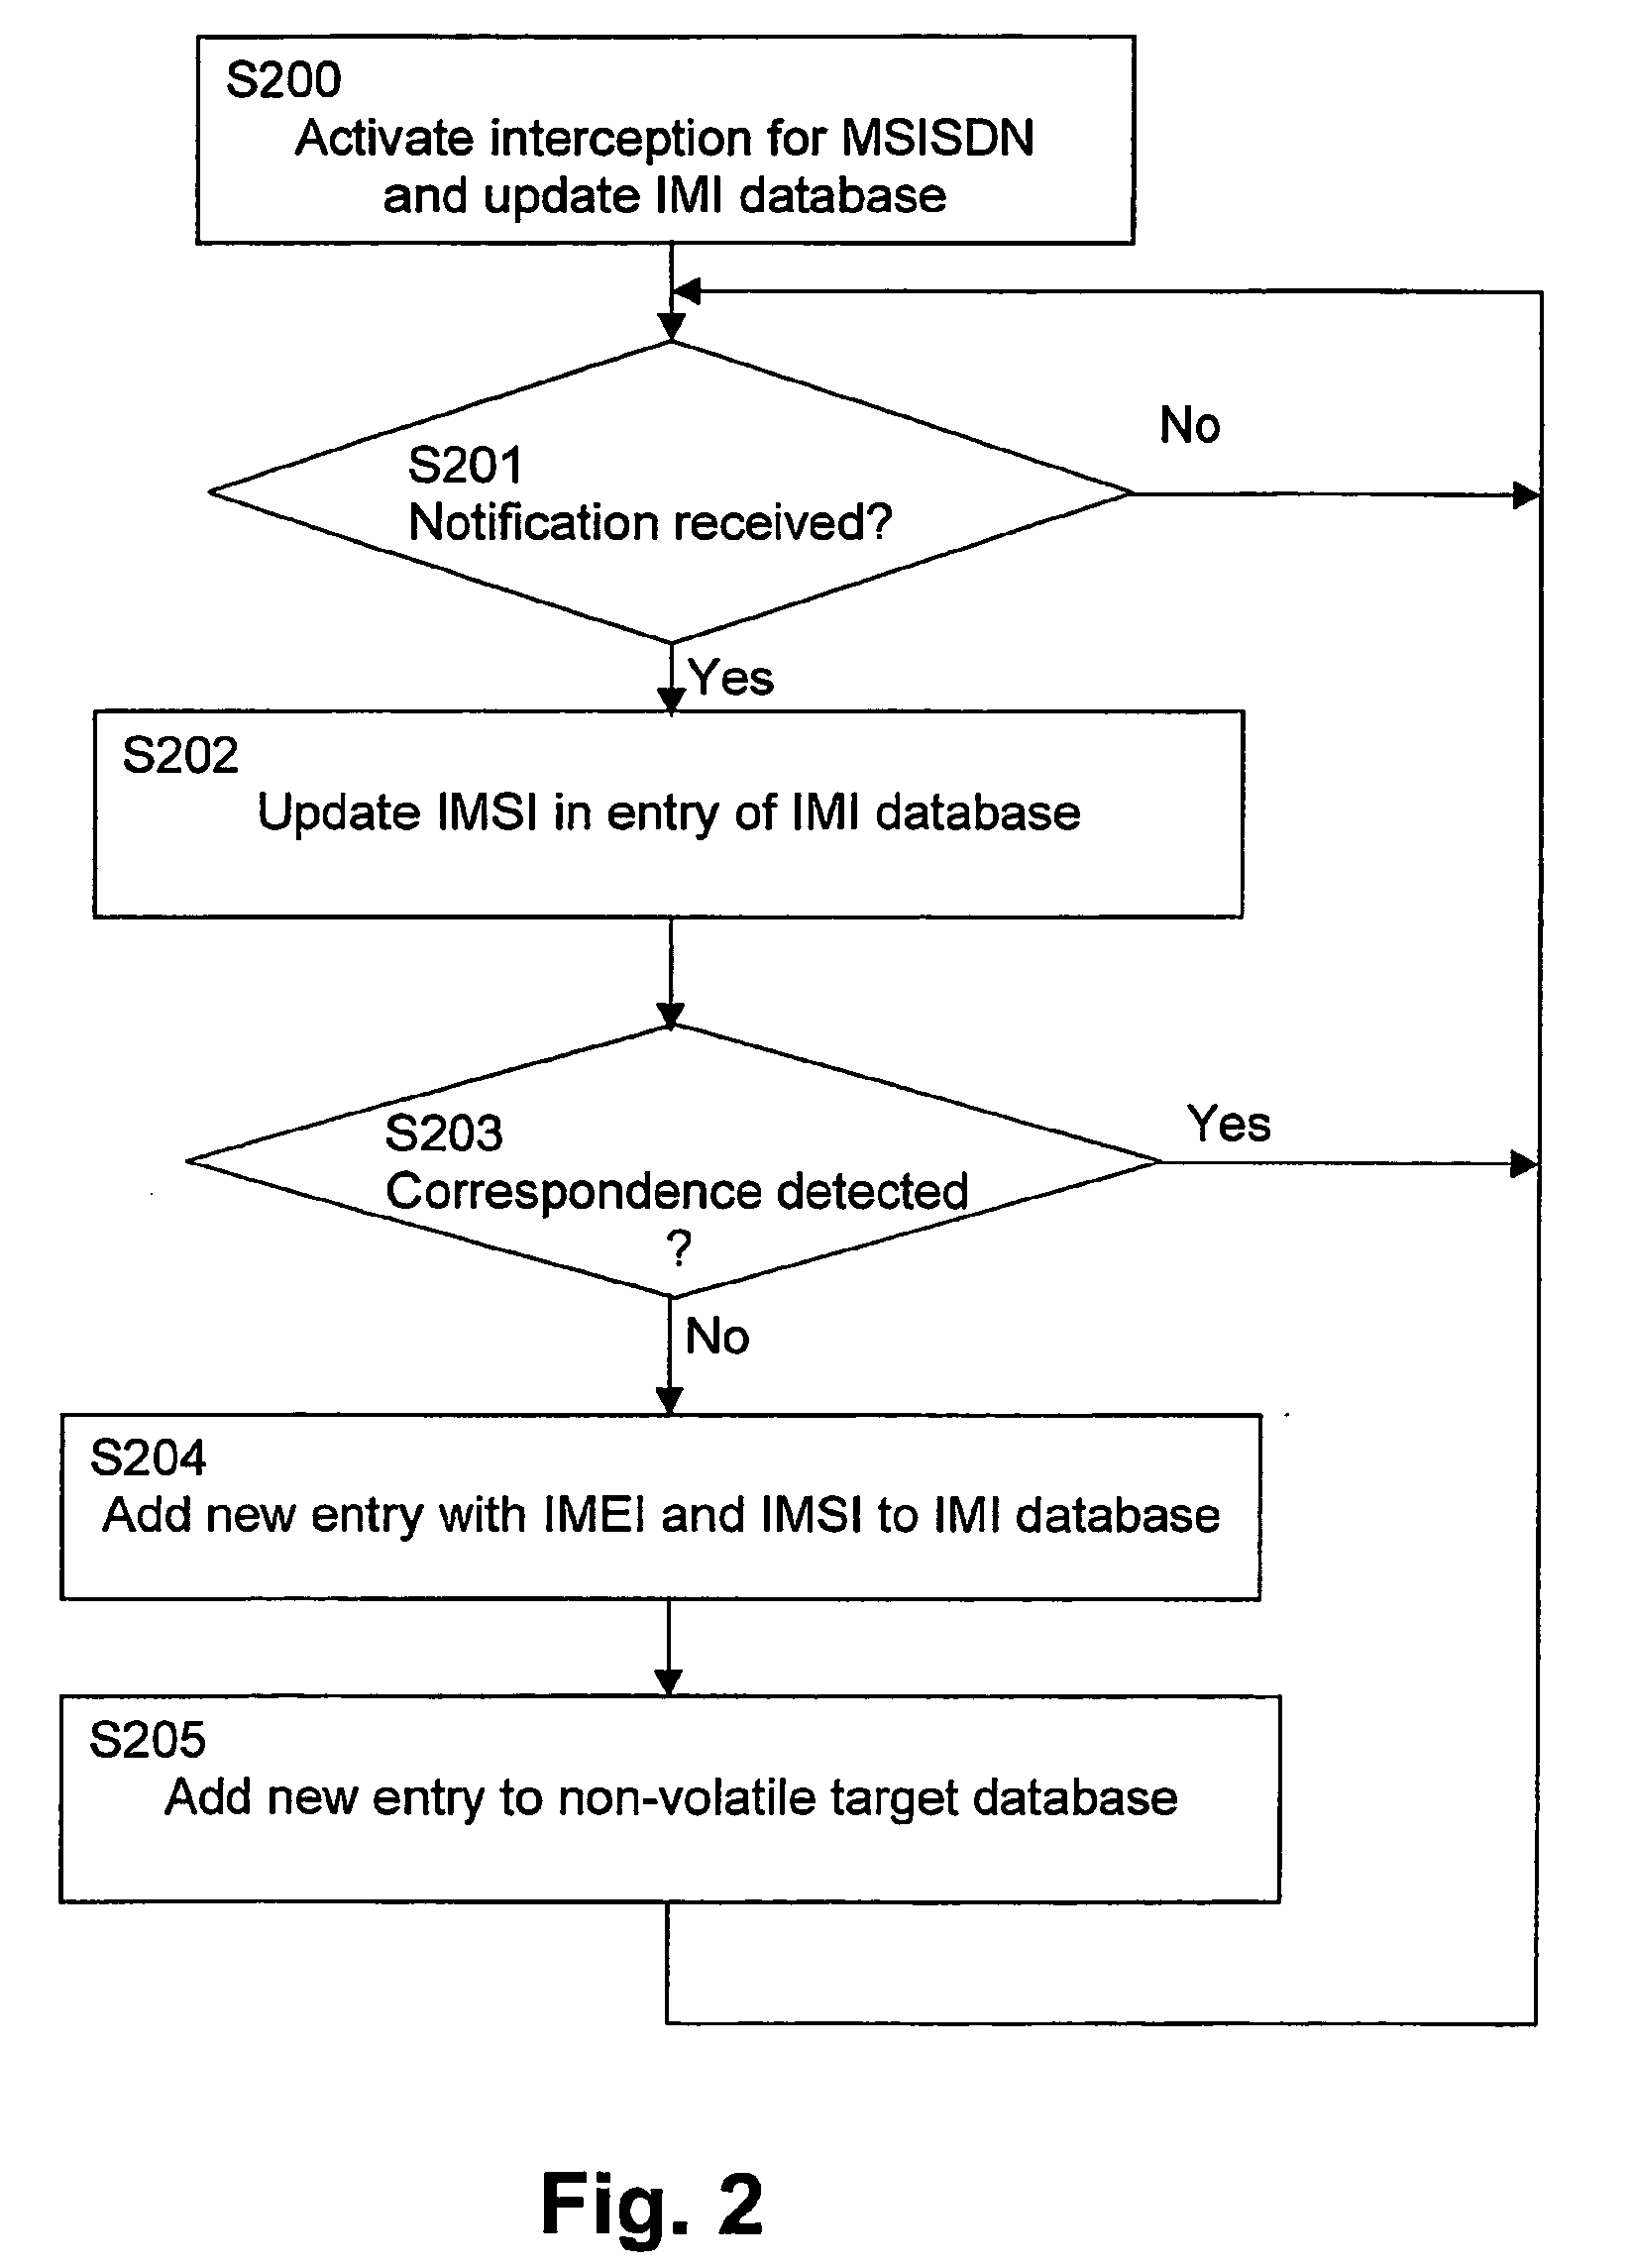 Infection-based monitoring of a party in a communication network